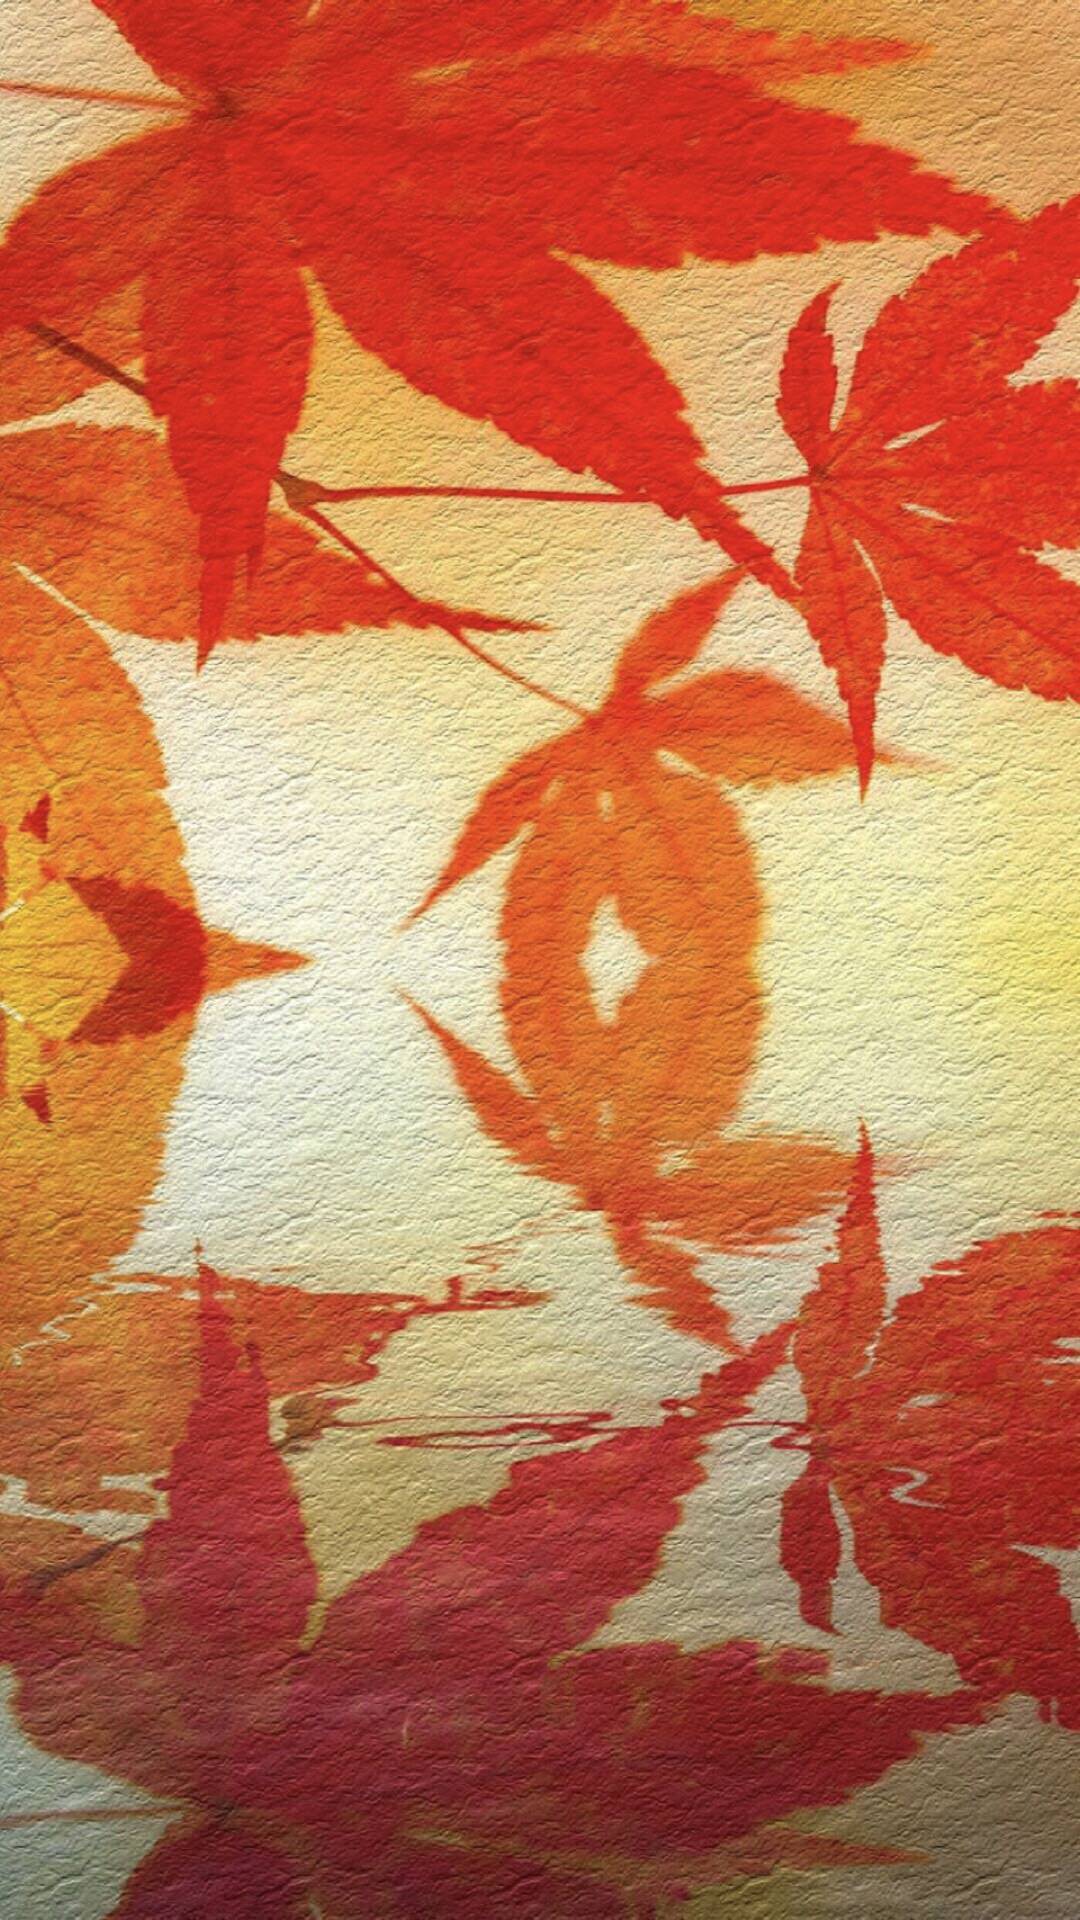 Autumn Leaves Japanese Style Wallpaper Sc Iphone8plus